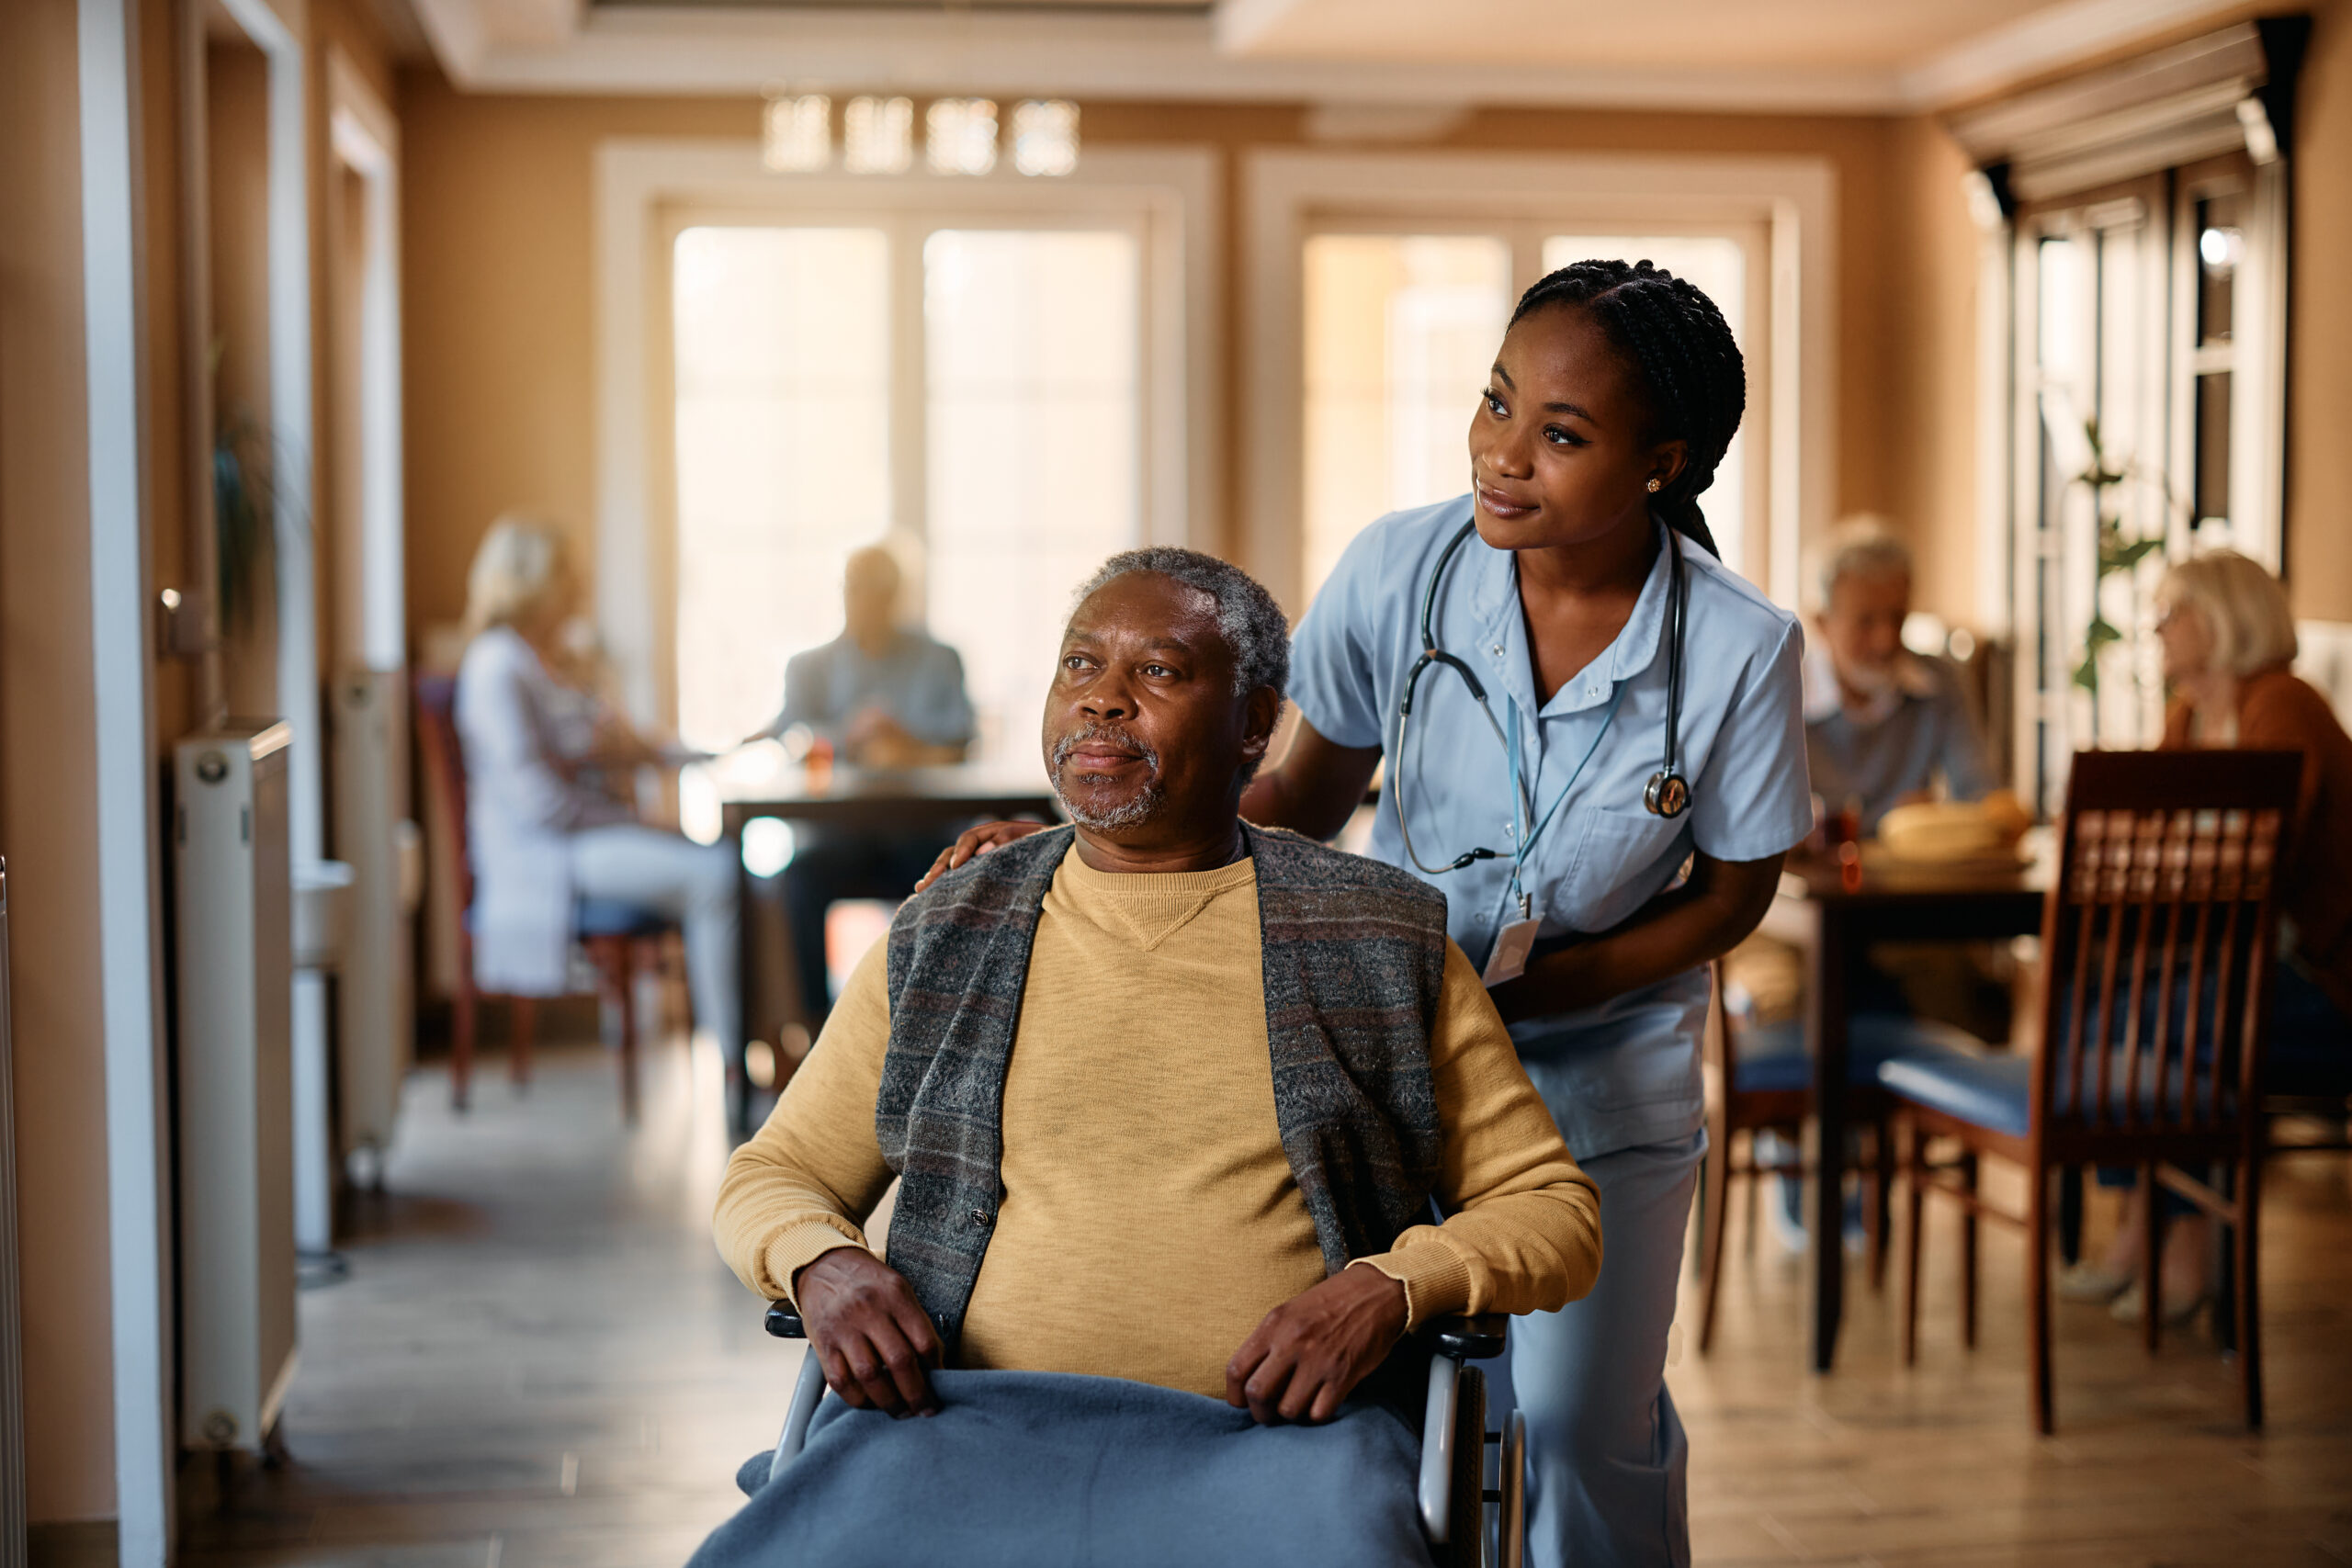 How to recognize when it is time to move a parent into assisted living?